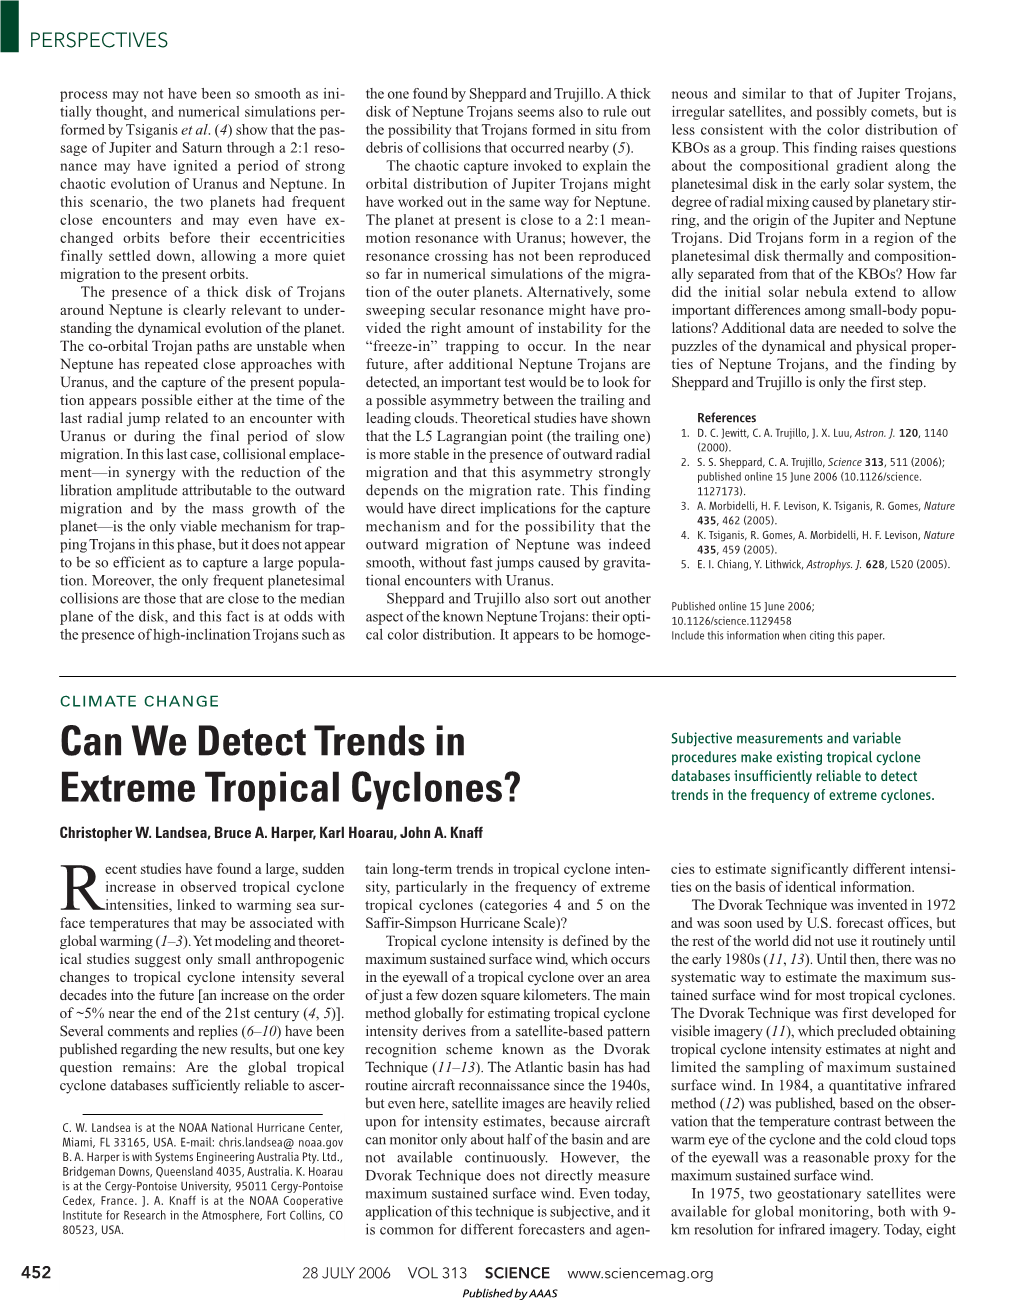 Can We Detect Trends in Extreme Tropical Cyclones?